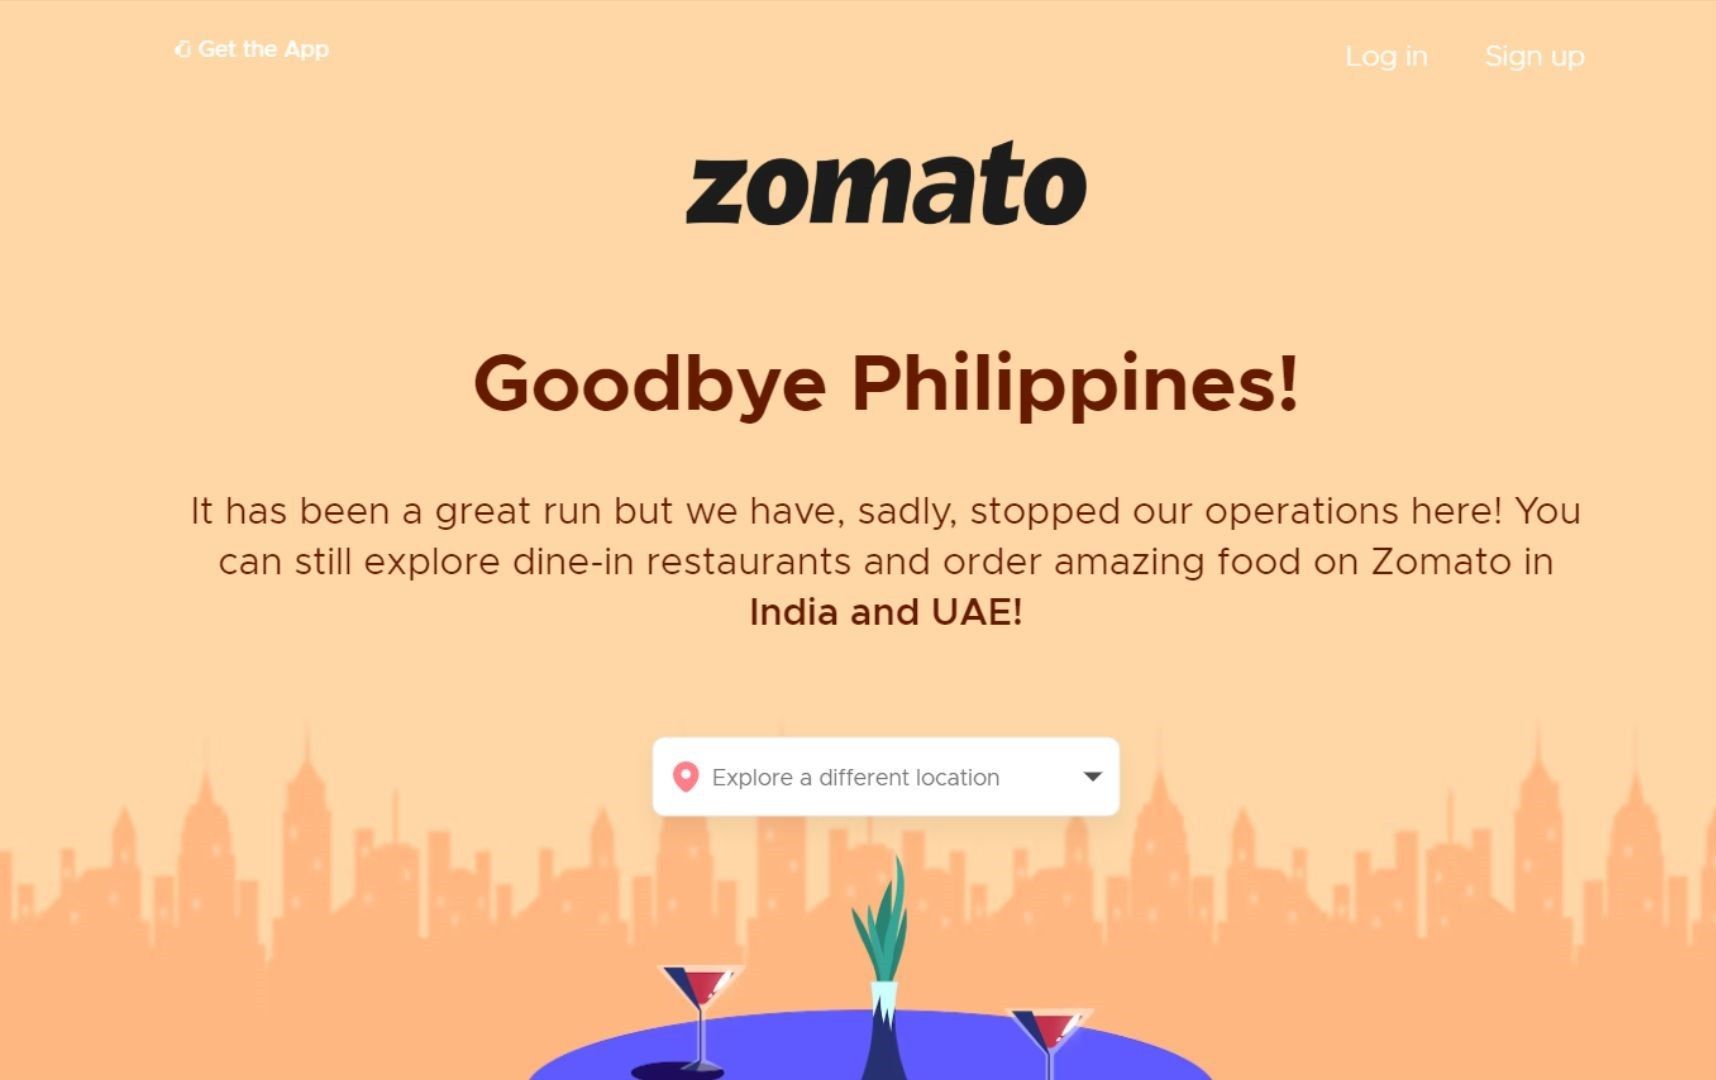 Zomato bids farewell, ends operations in the Philippines